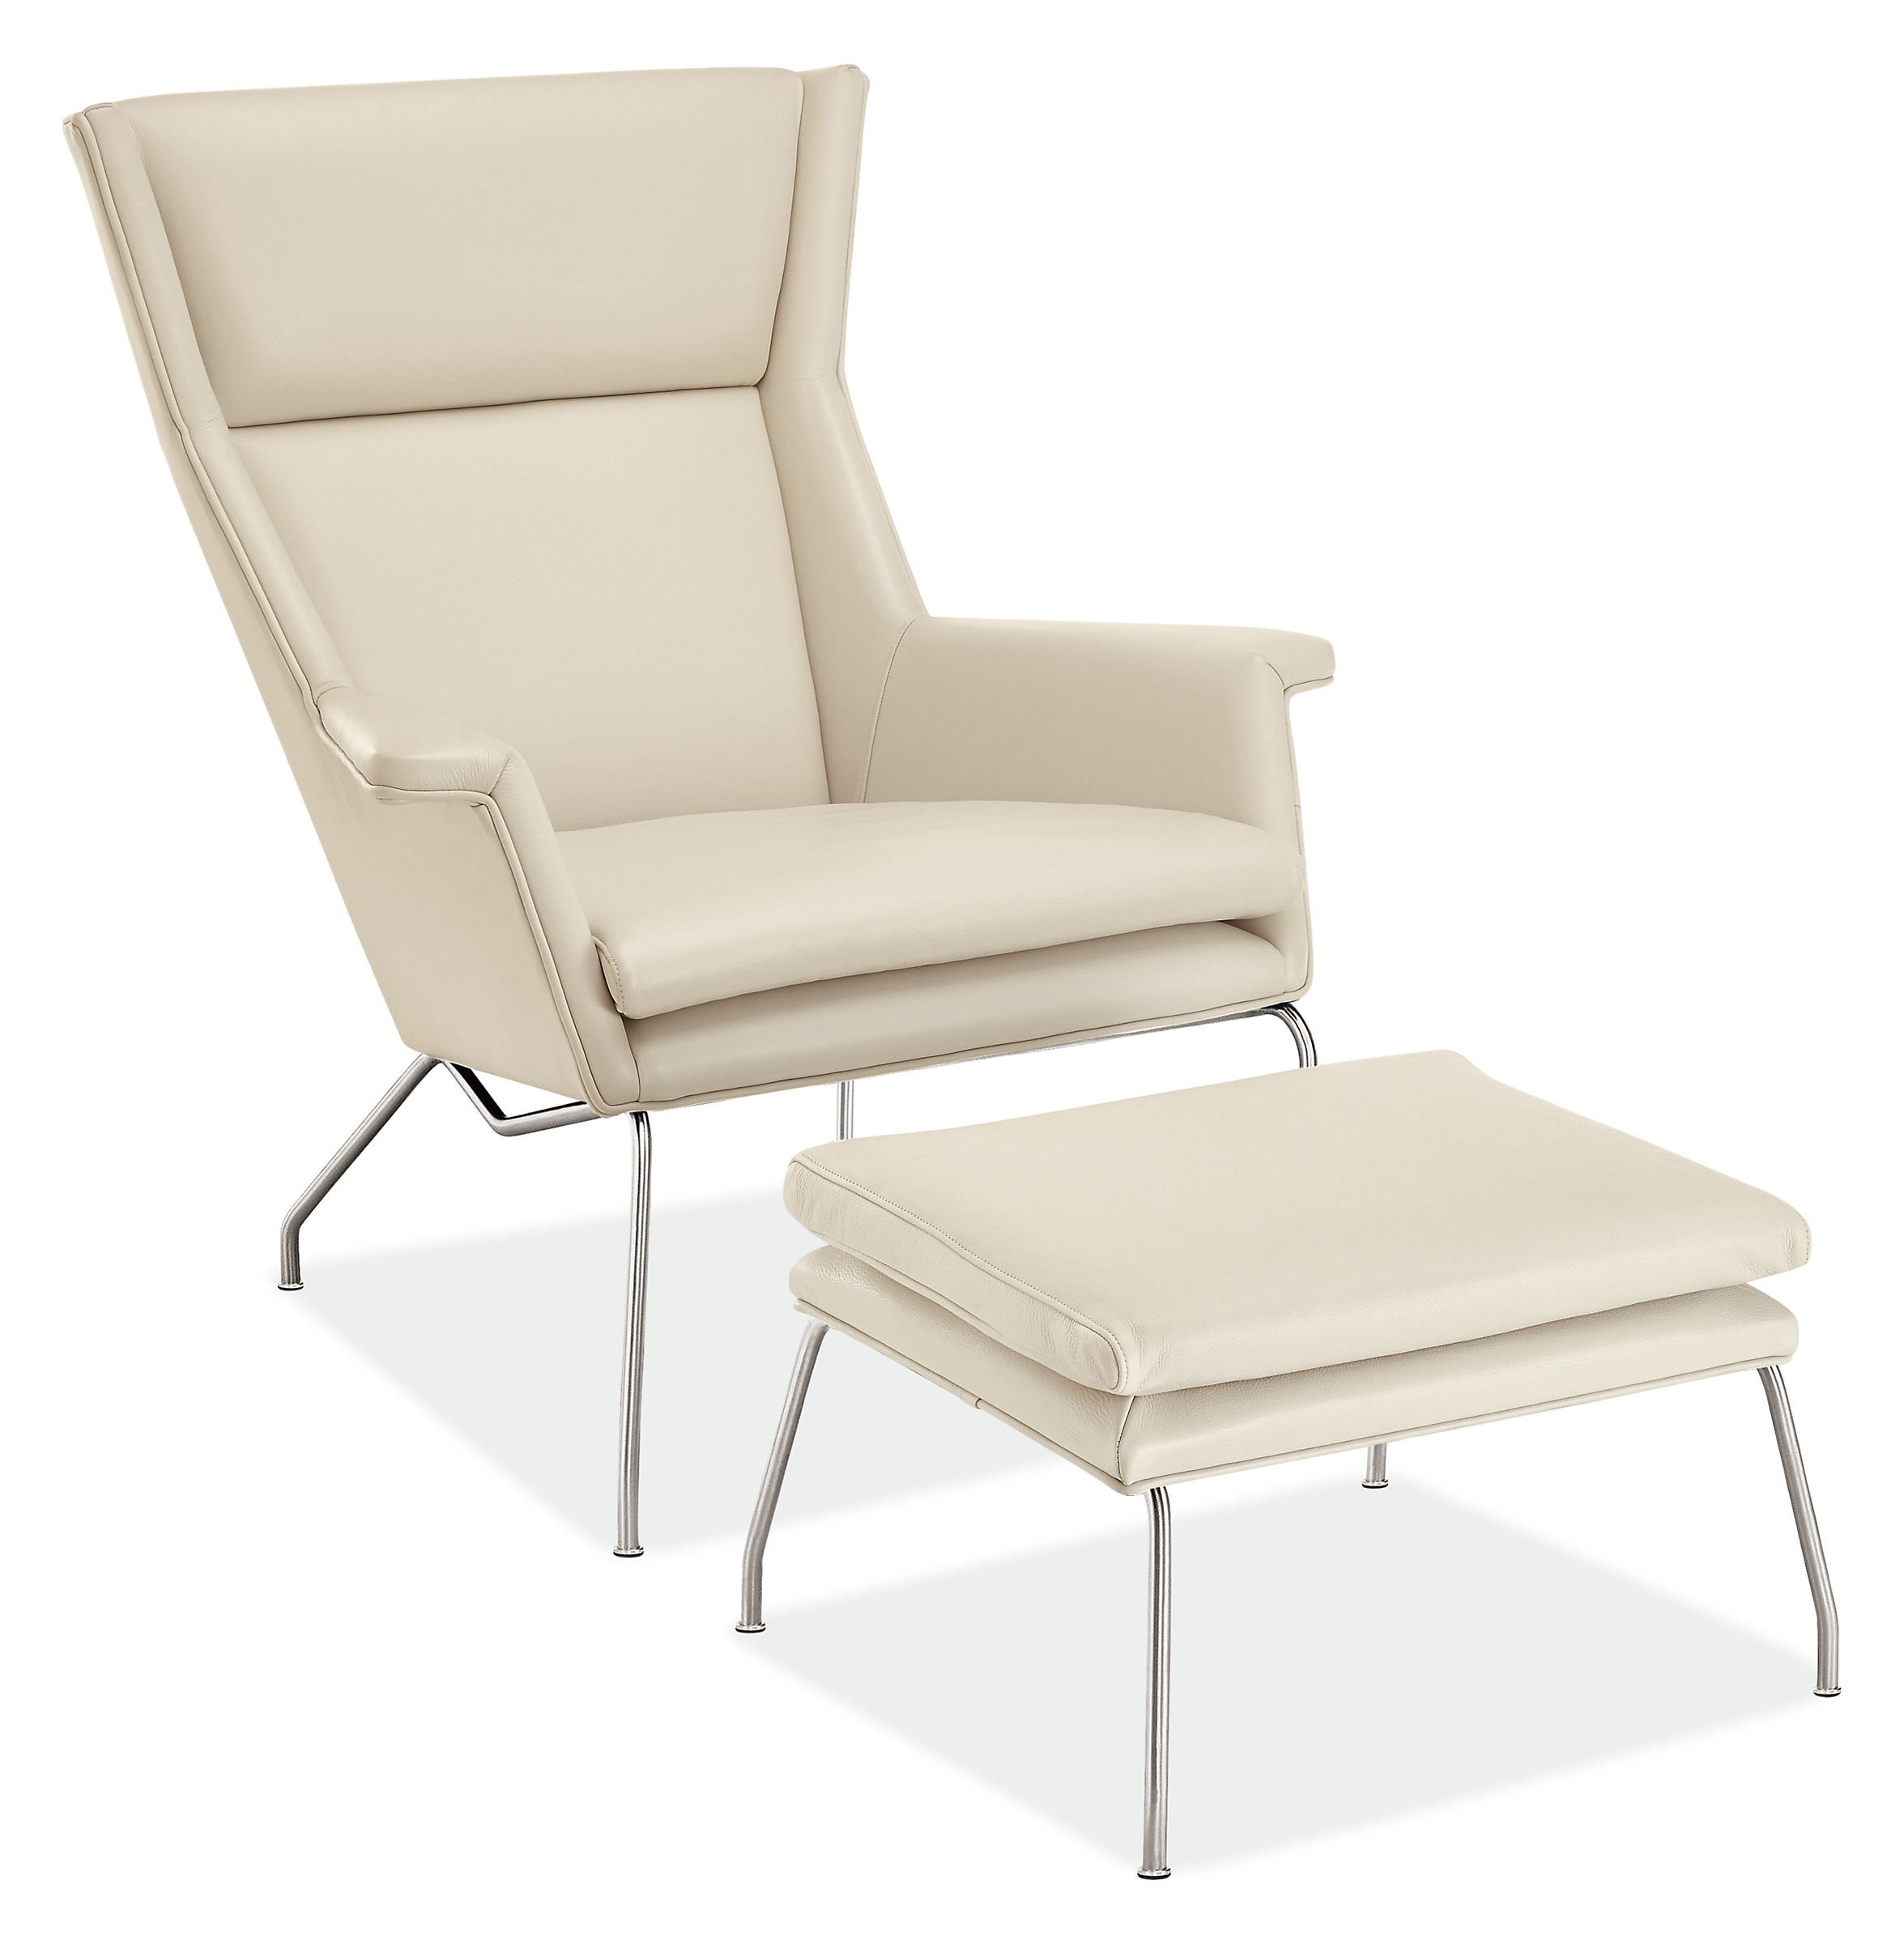 Angle  view of Aidan Chair and Ottoman in Urbino Leather with Stainless Steel base.